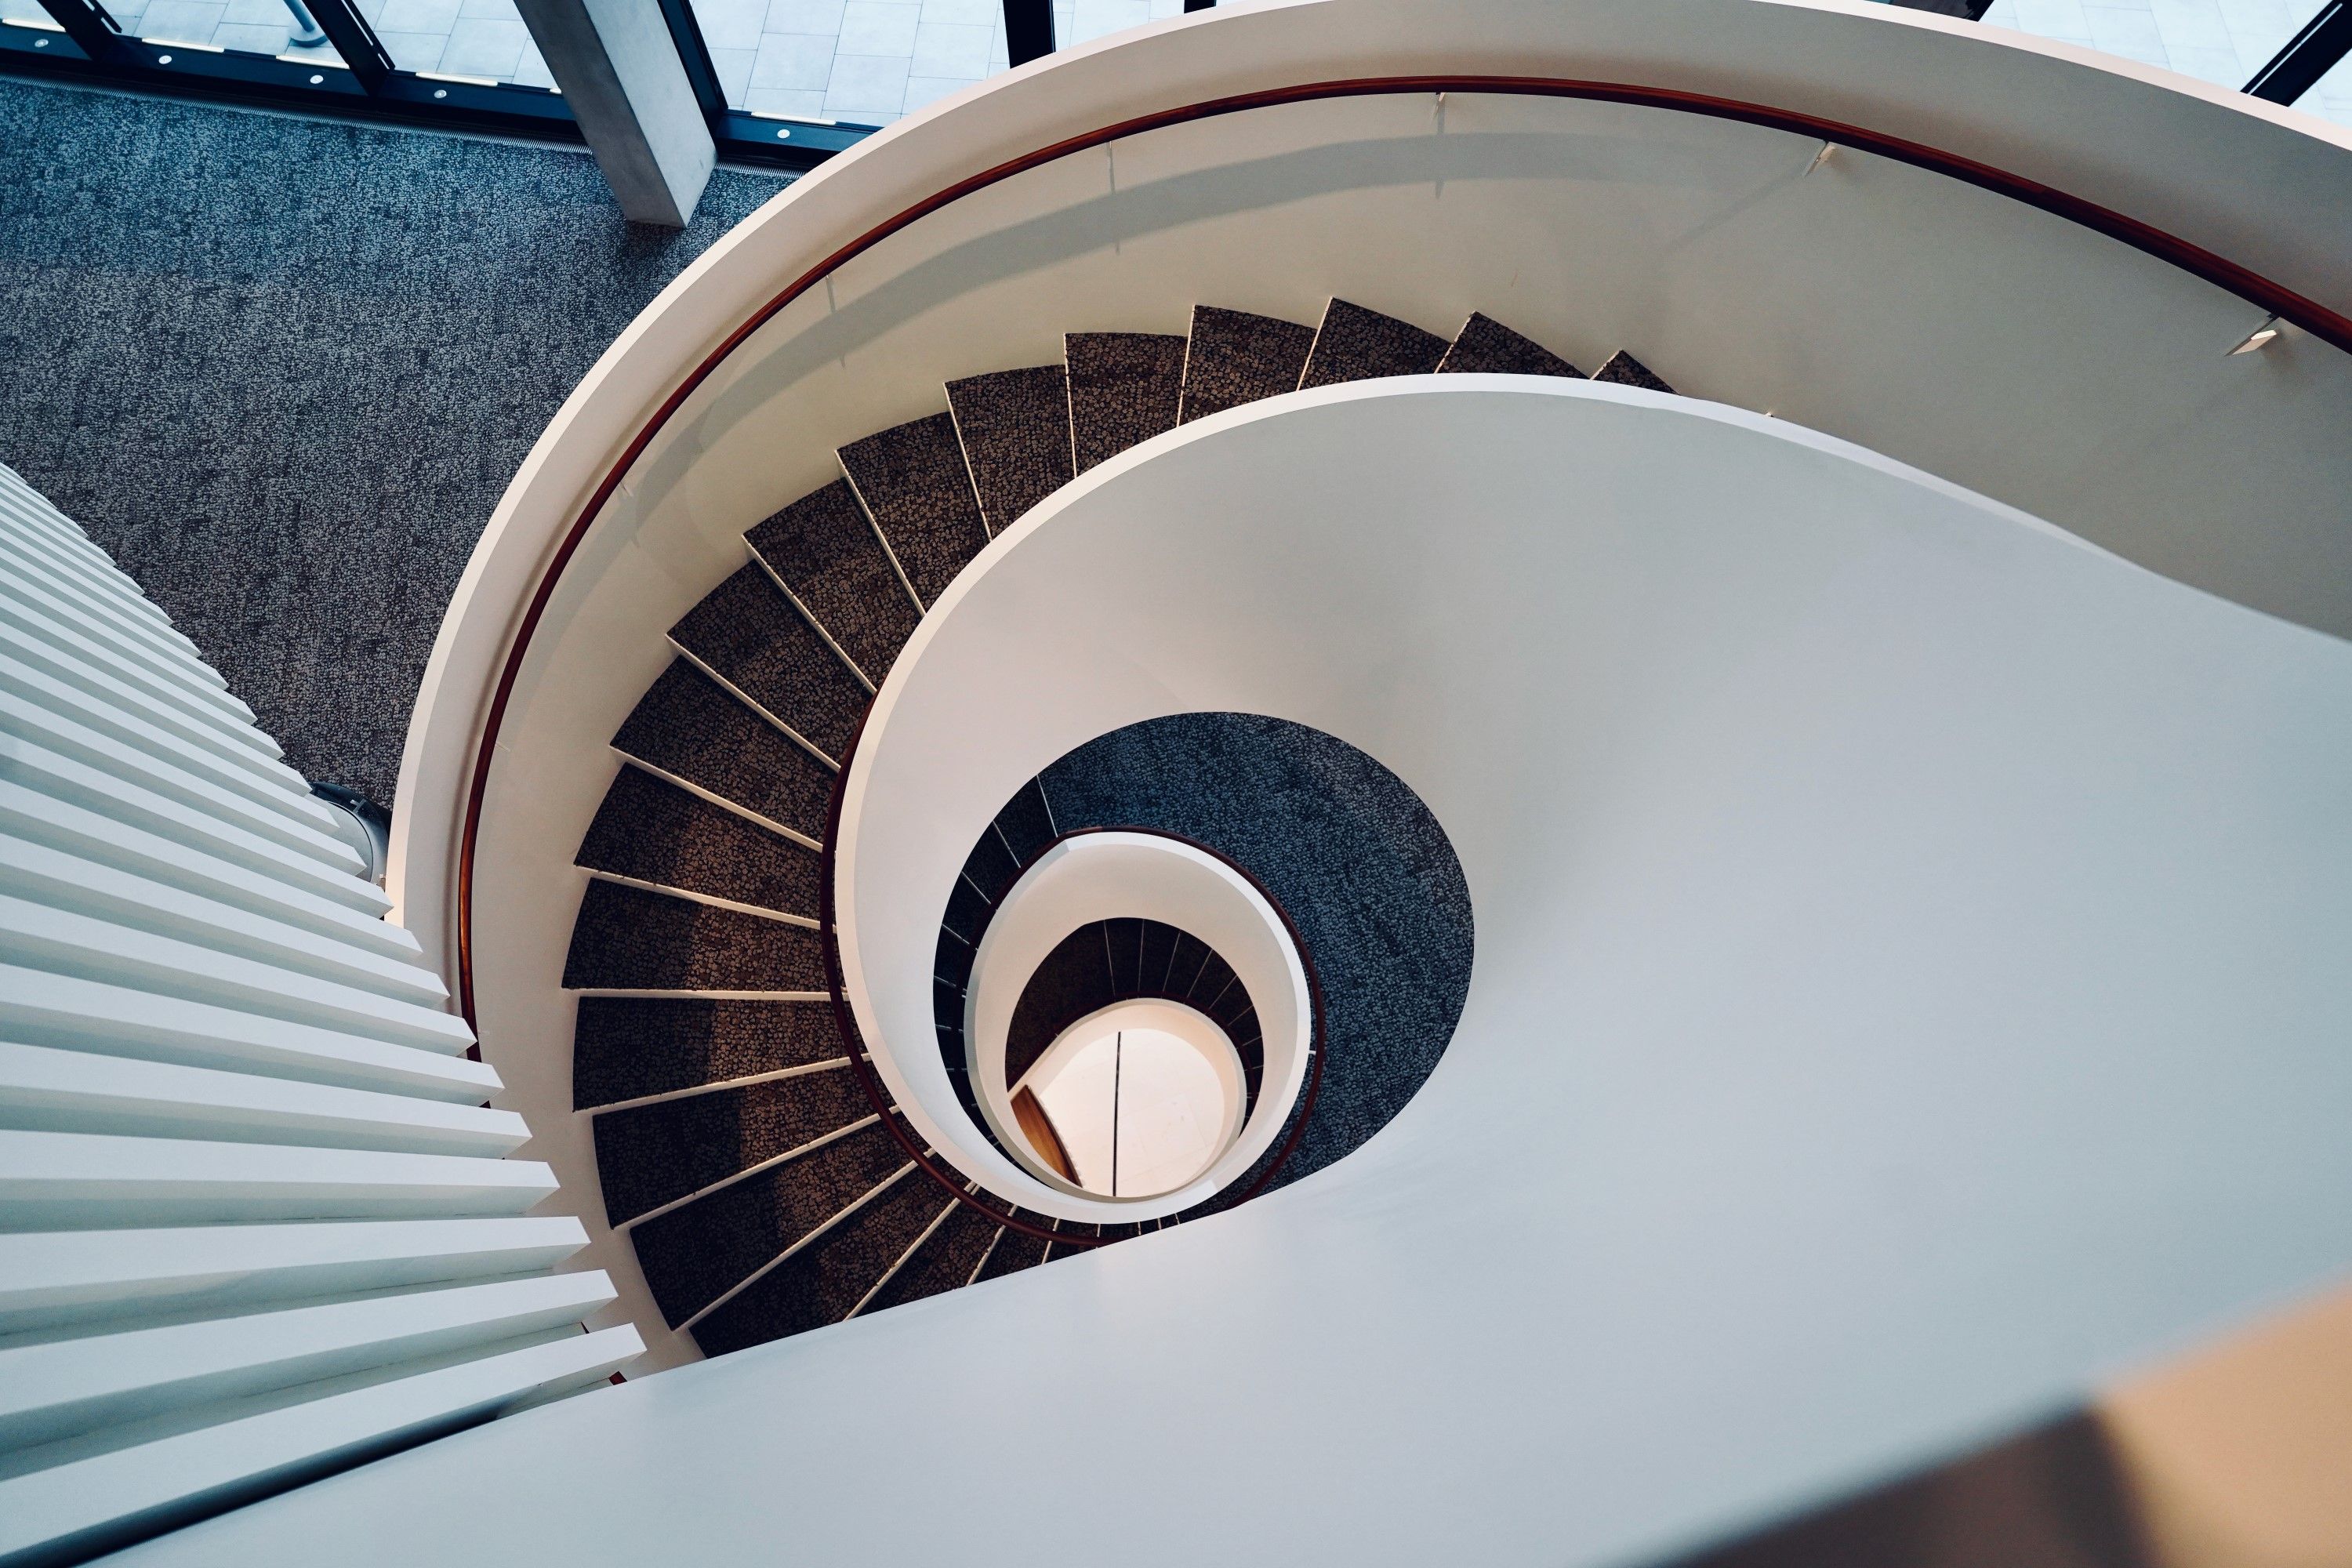 Spiral staircase in the CCH photographed from above